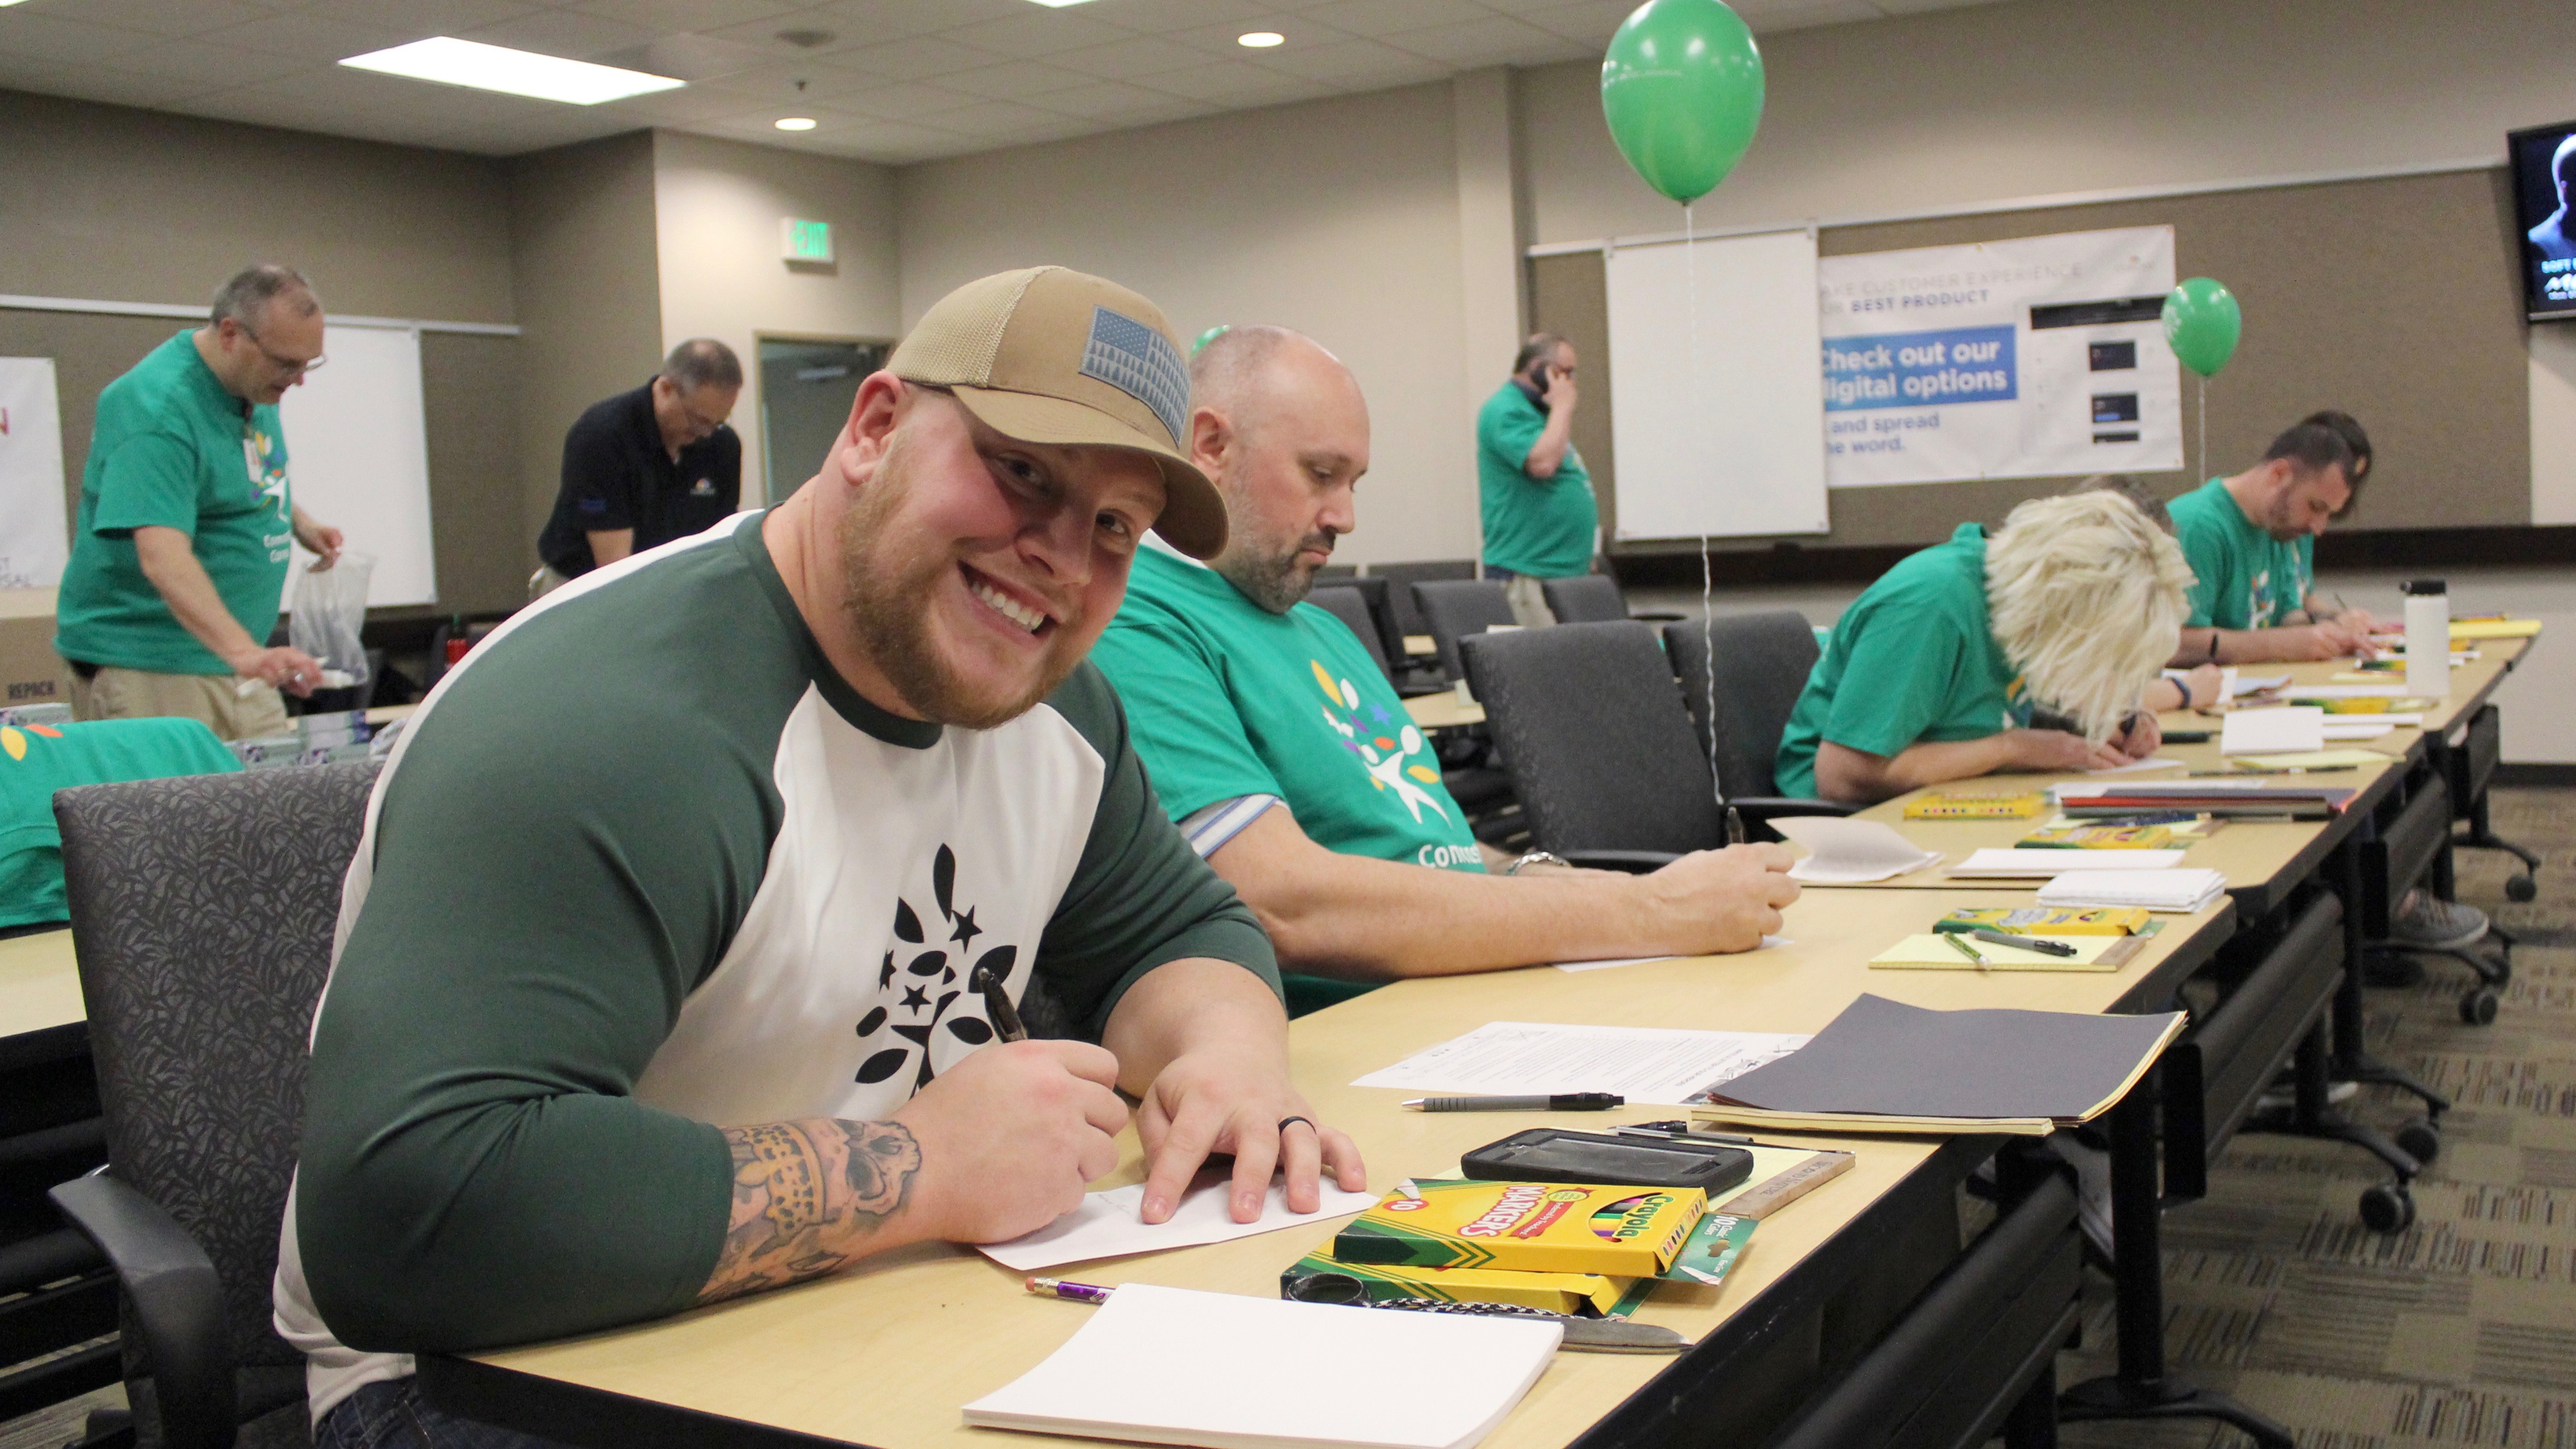 Cody King and other Comcast Cares Day volunteers sit at desks and write on piece of paper.